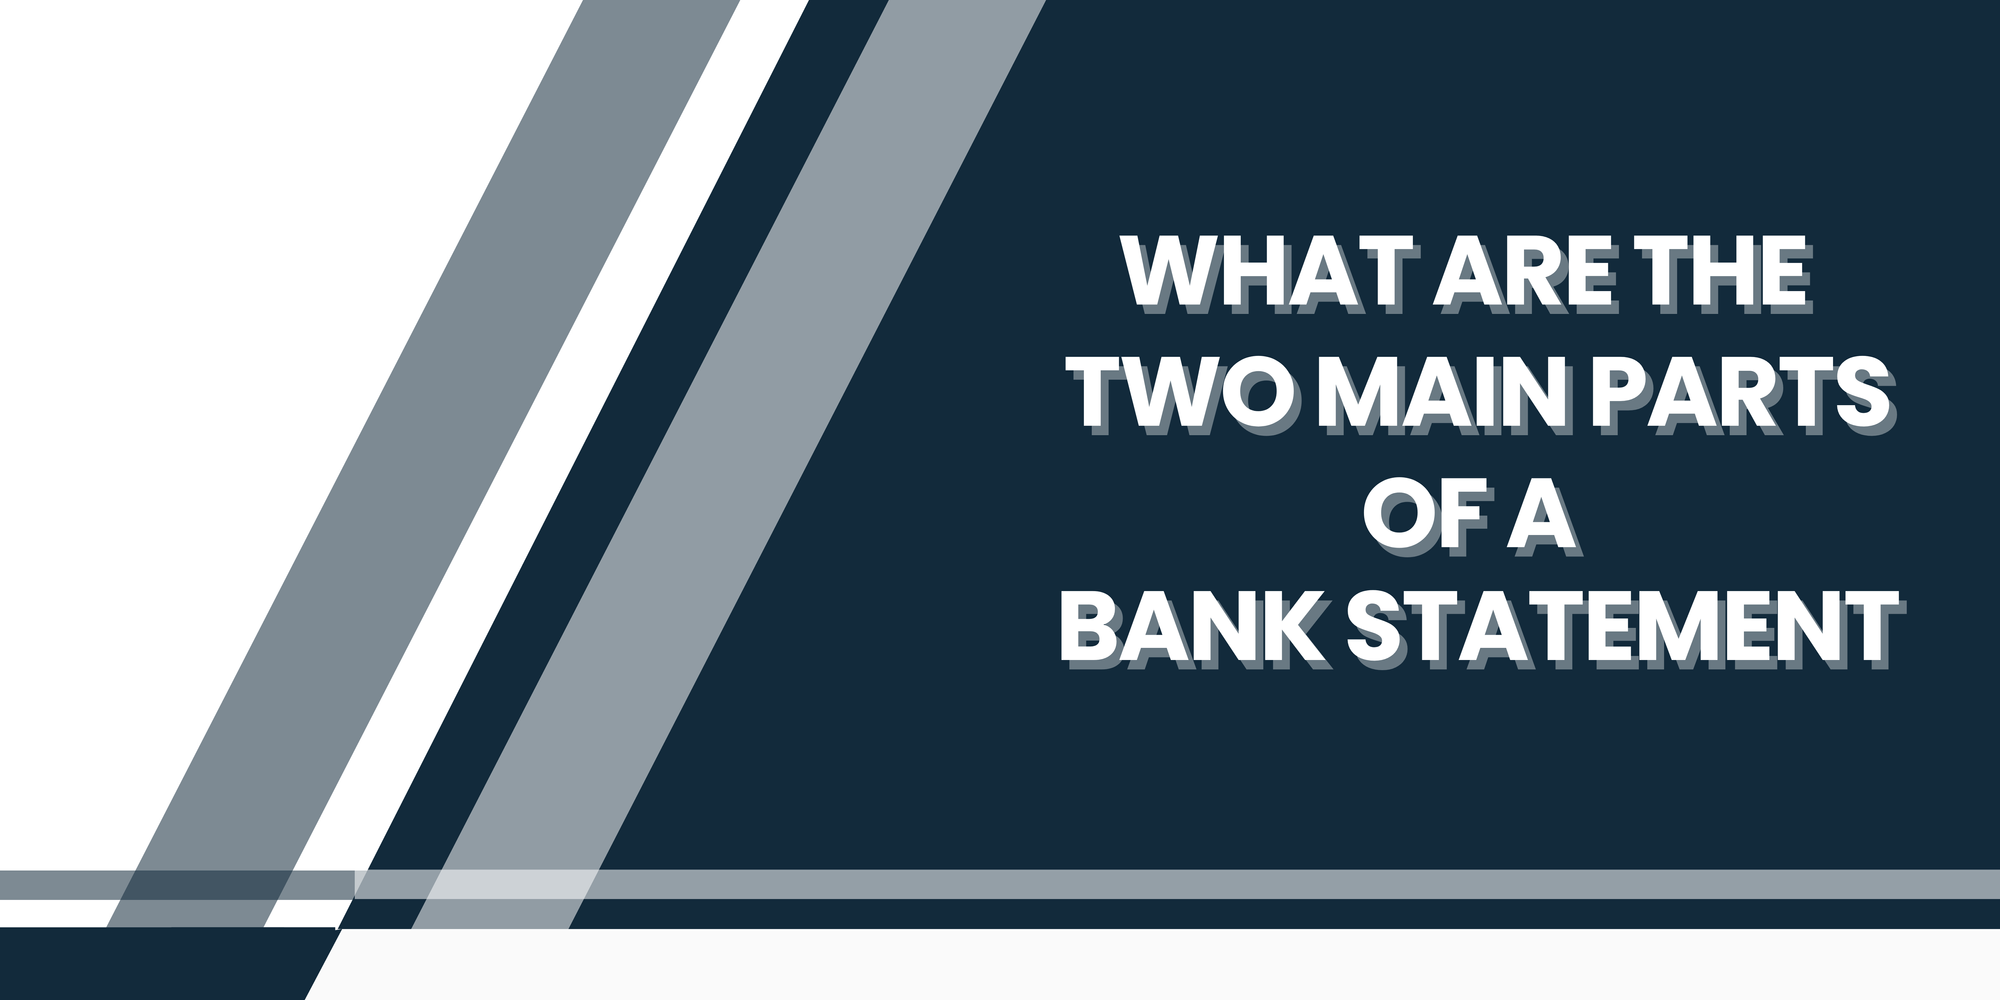 What are The Two Main Parts of A Bank Statement